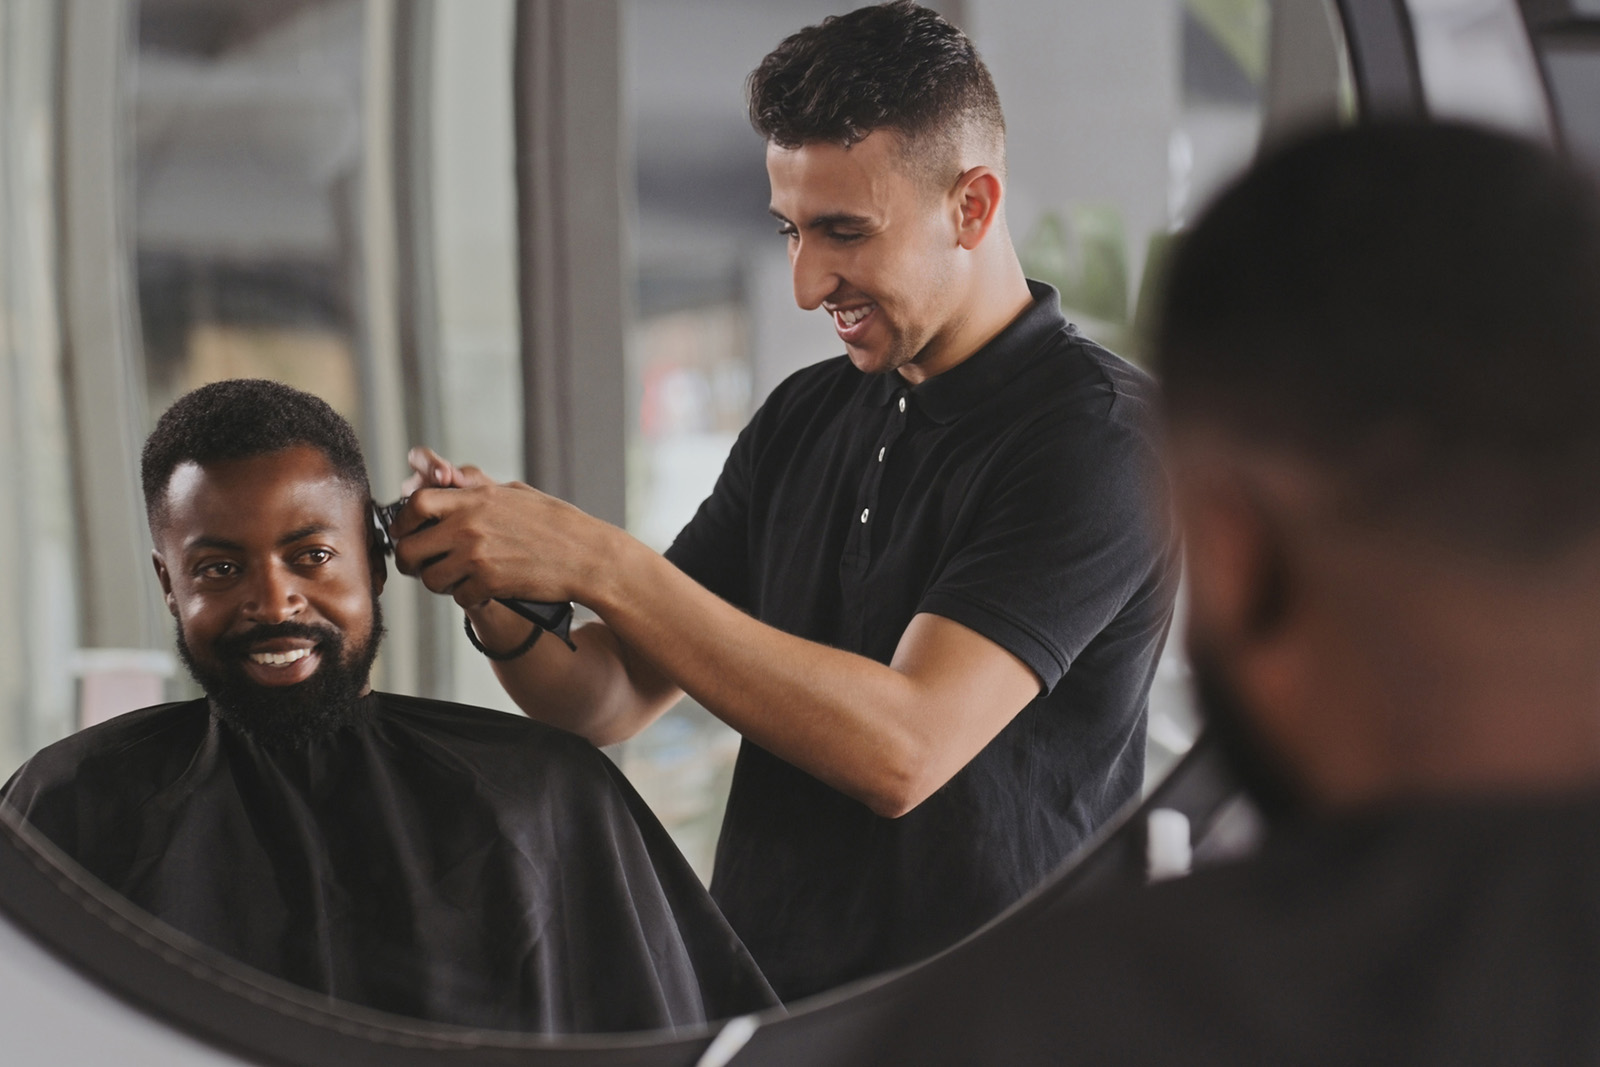 Barber is cutting client's hair